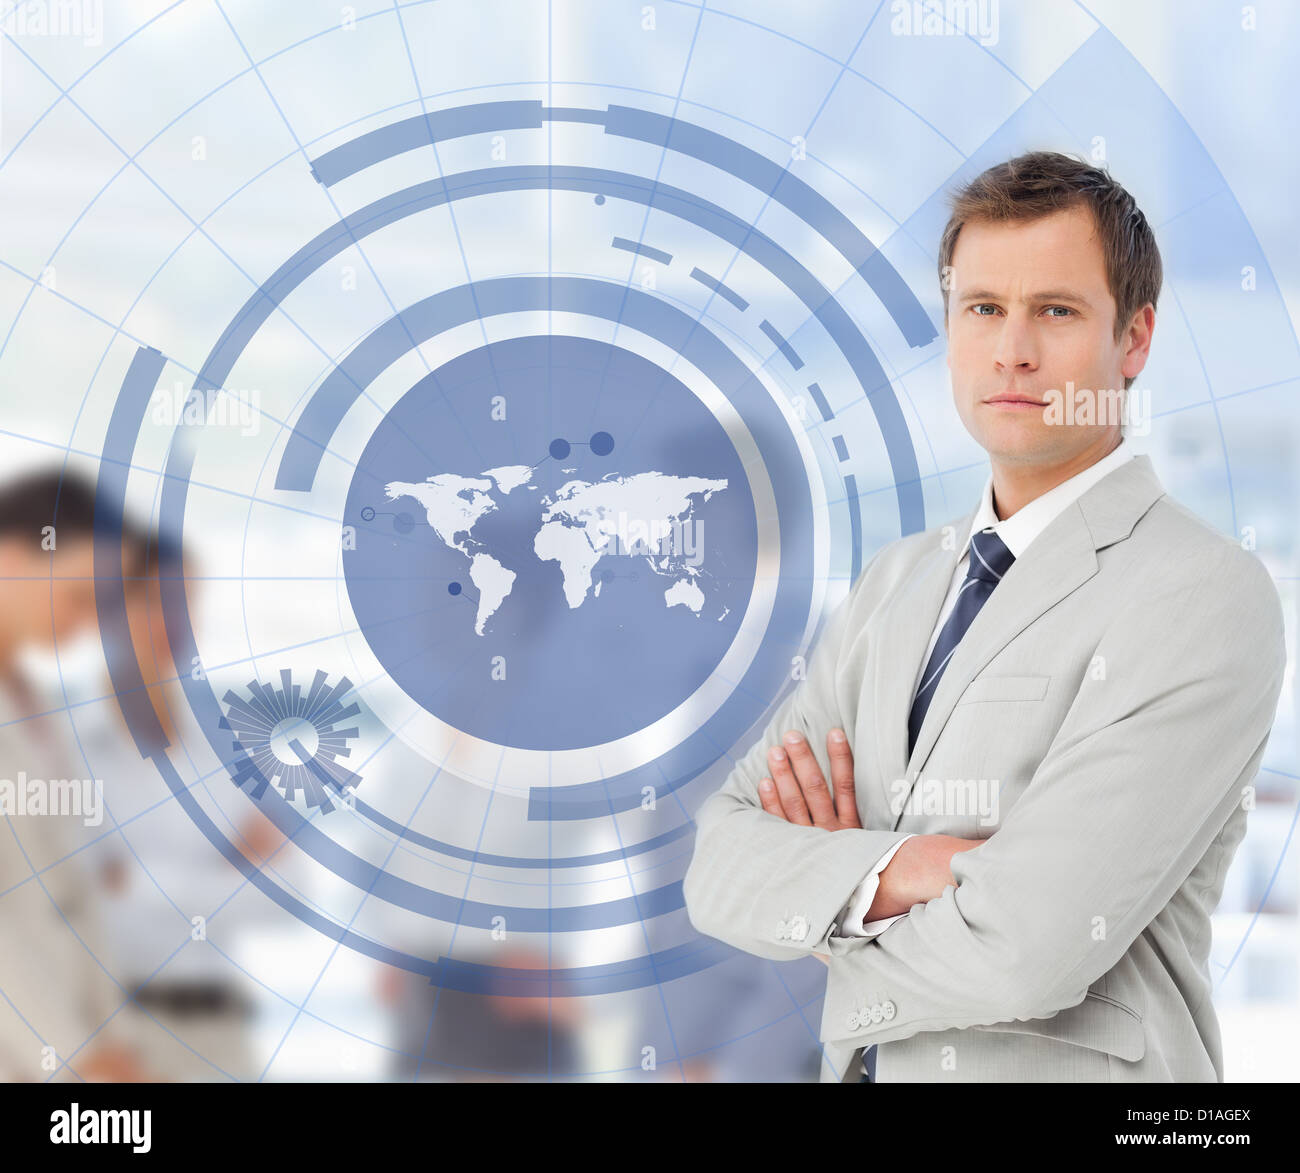 Salesman with a world map illustration Stock Photo